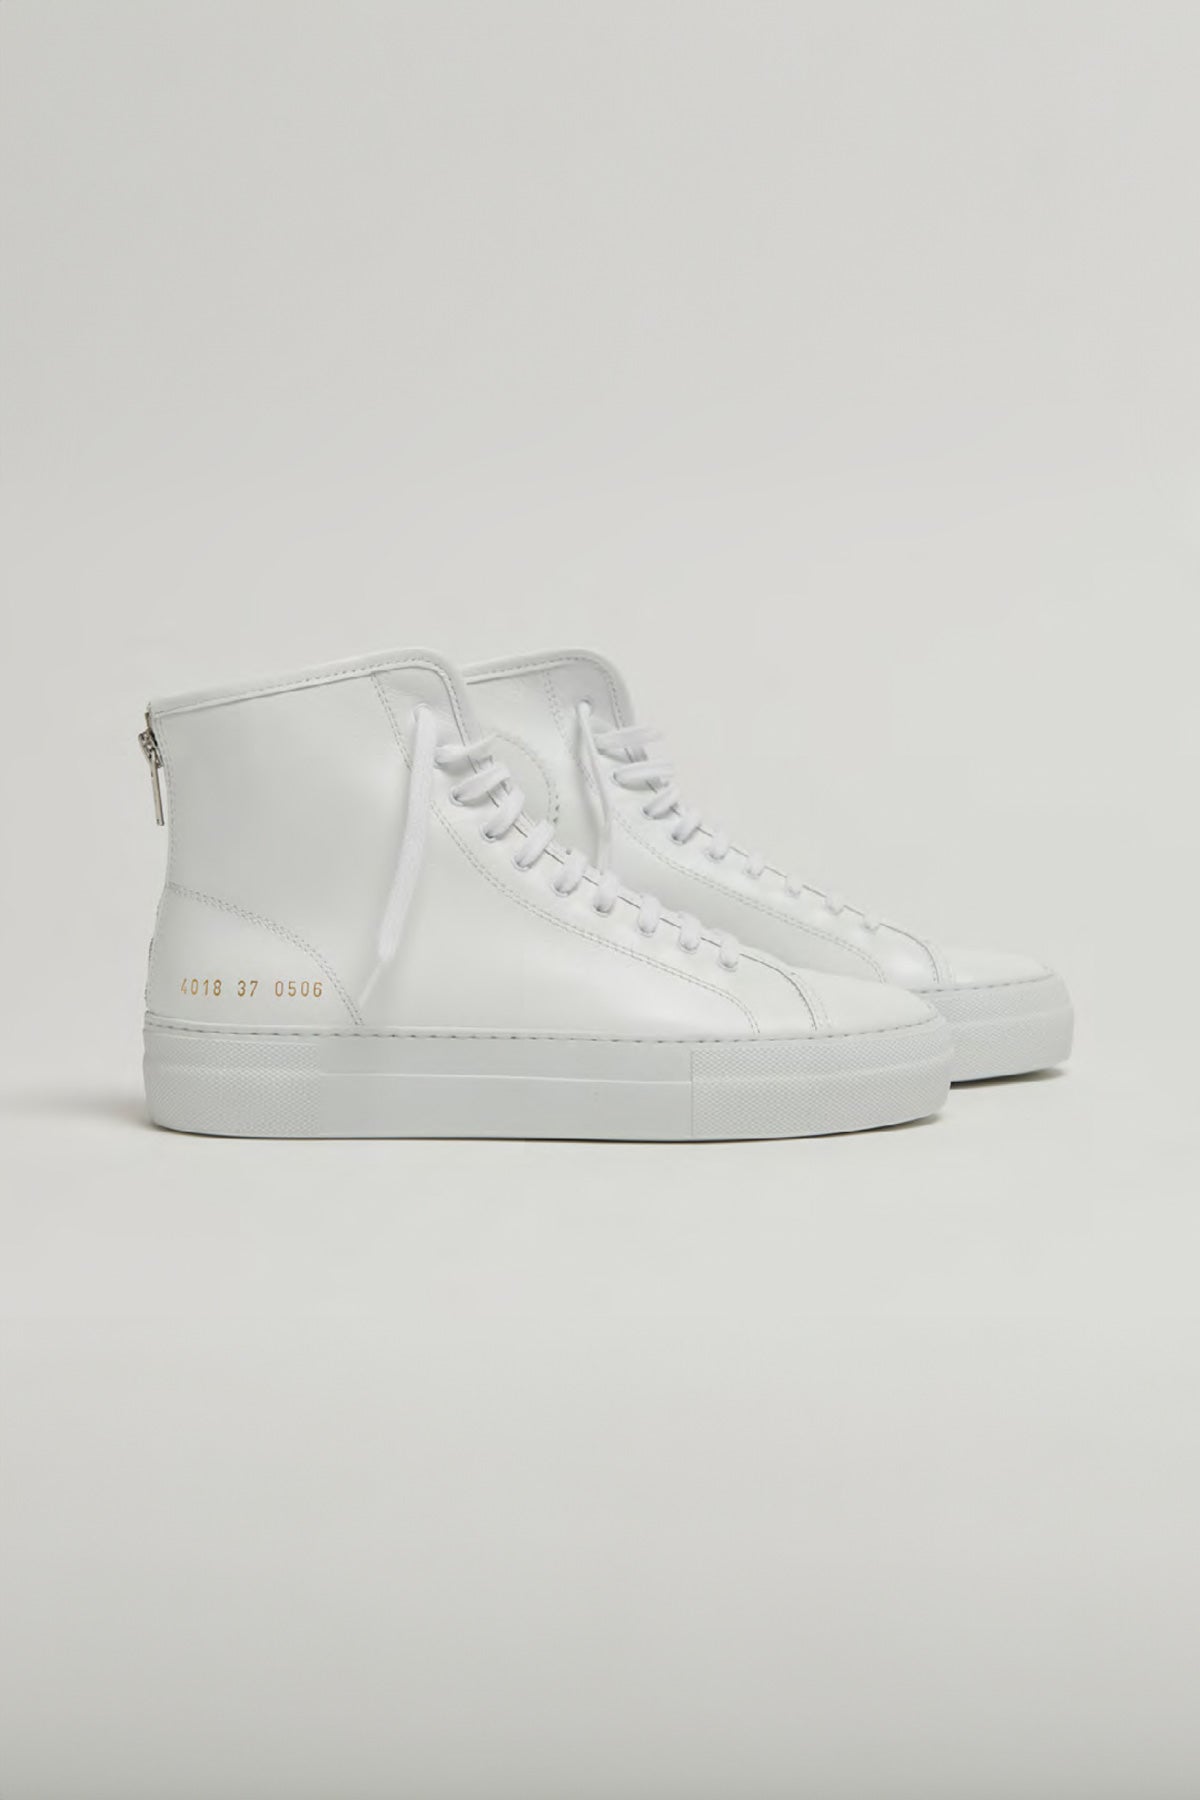 Common Projects — Tournament High Super